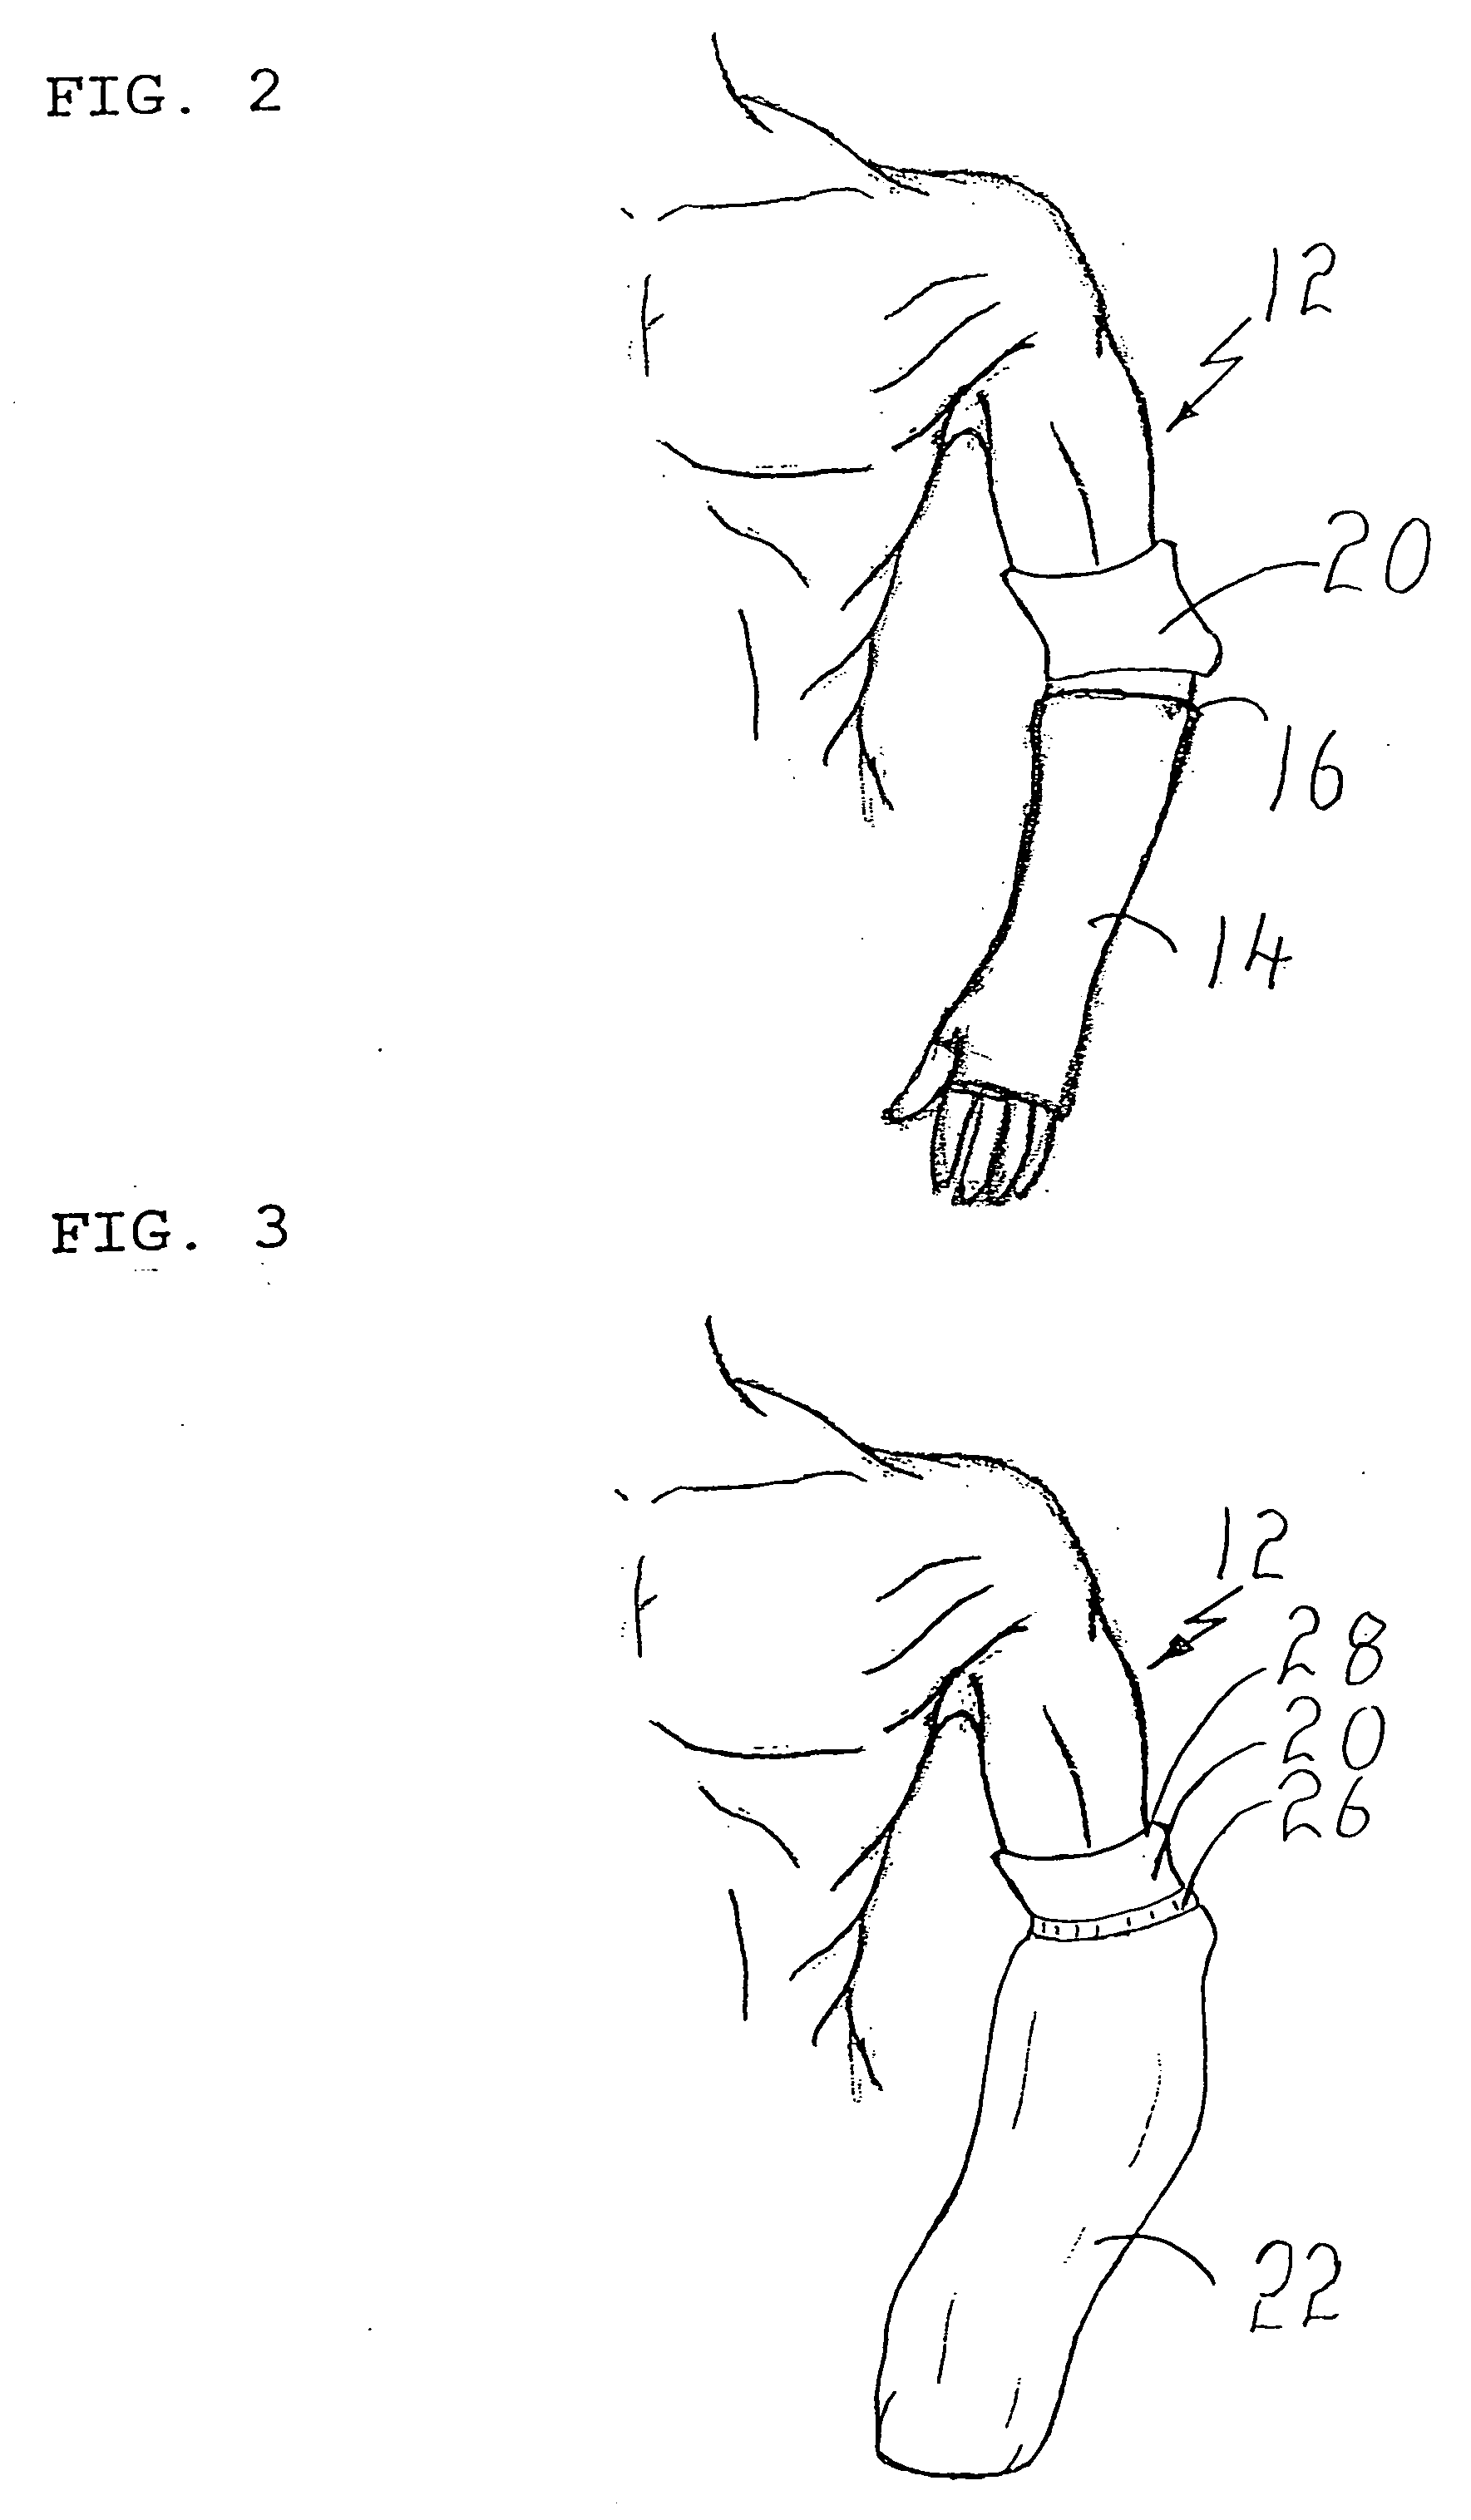 Method of sealing an opening on a waterproof covering for a limb